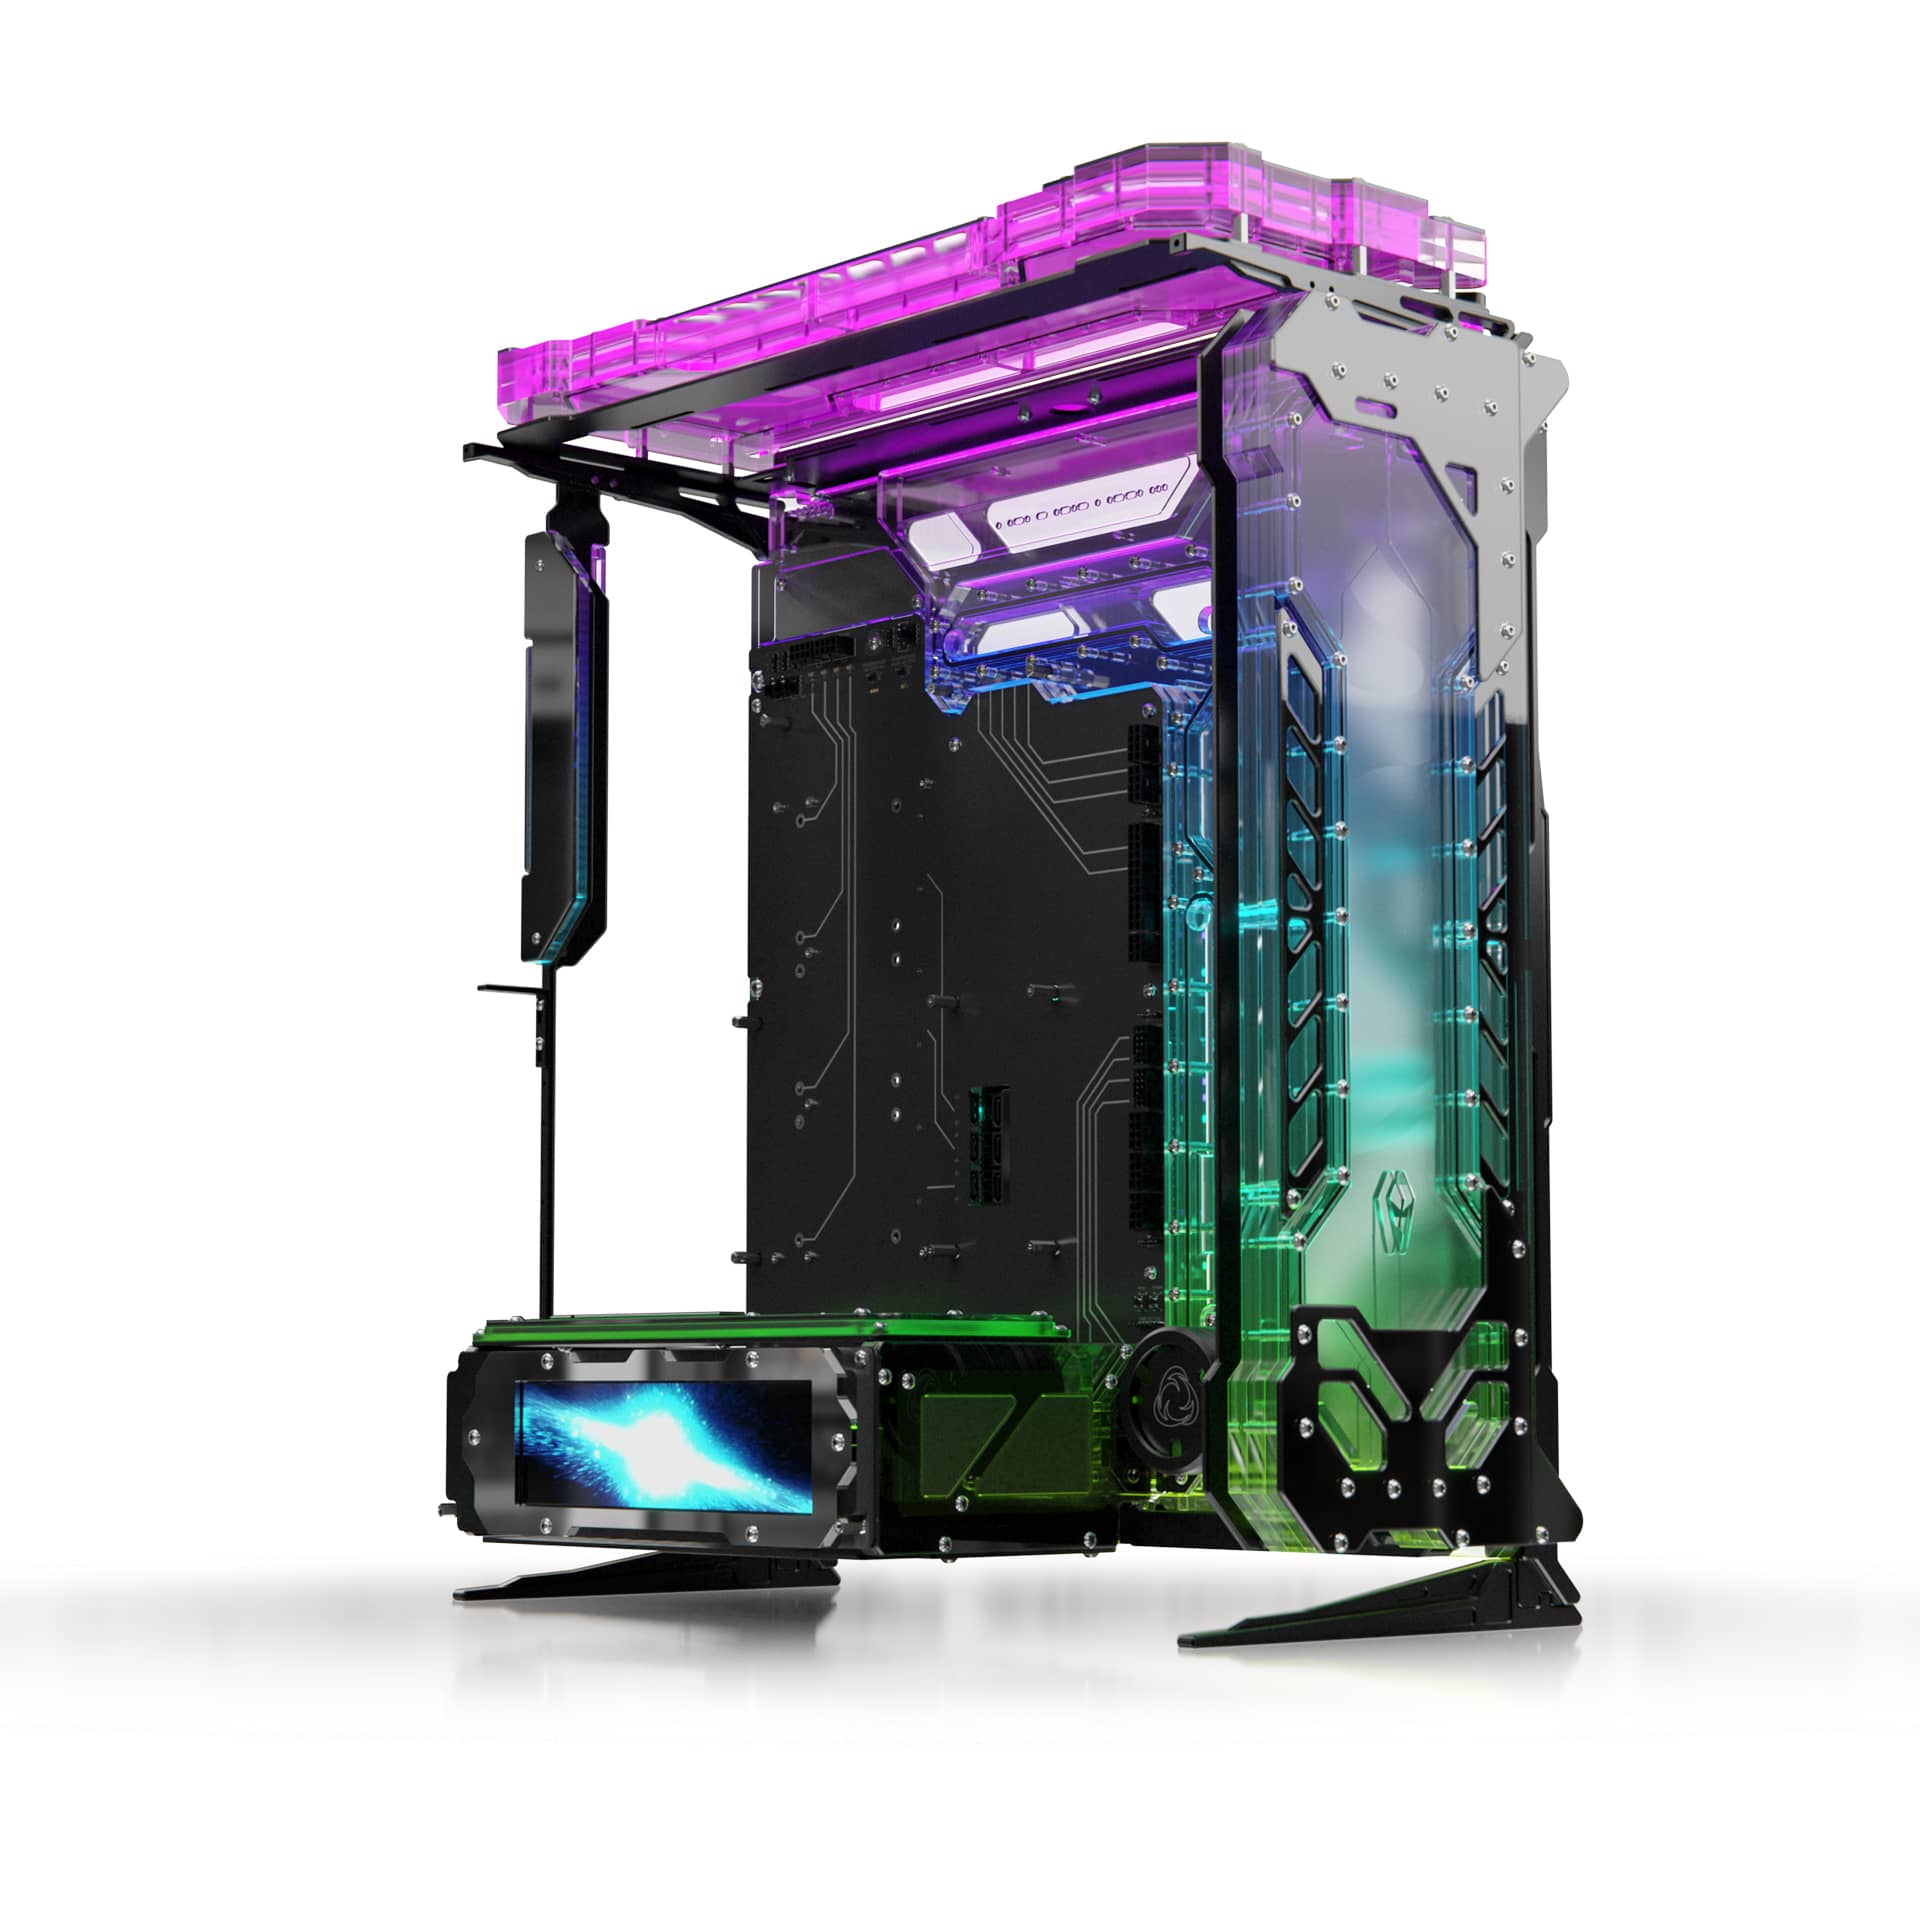 LIAN LI pushes new update to the O11 series PC chassis with new